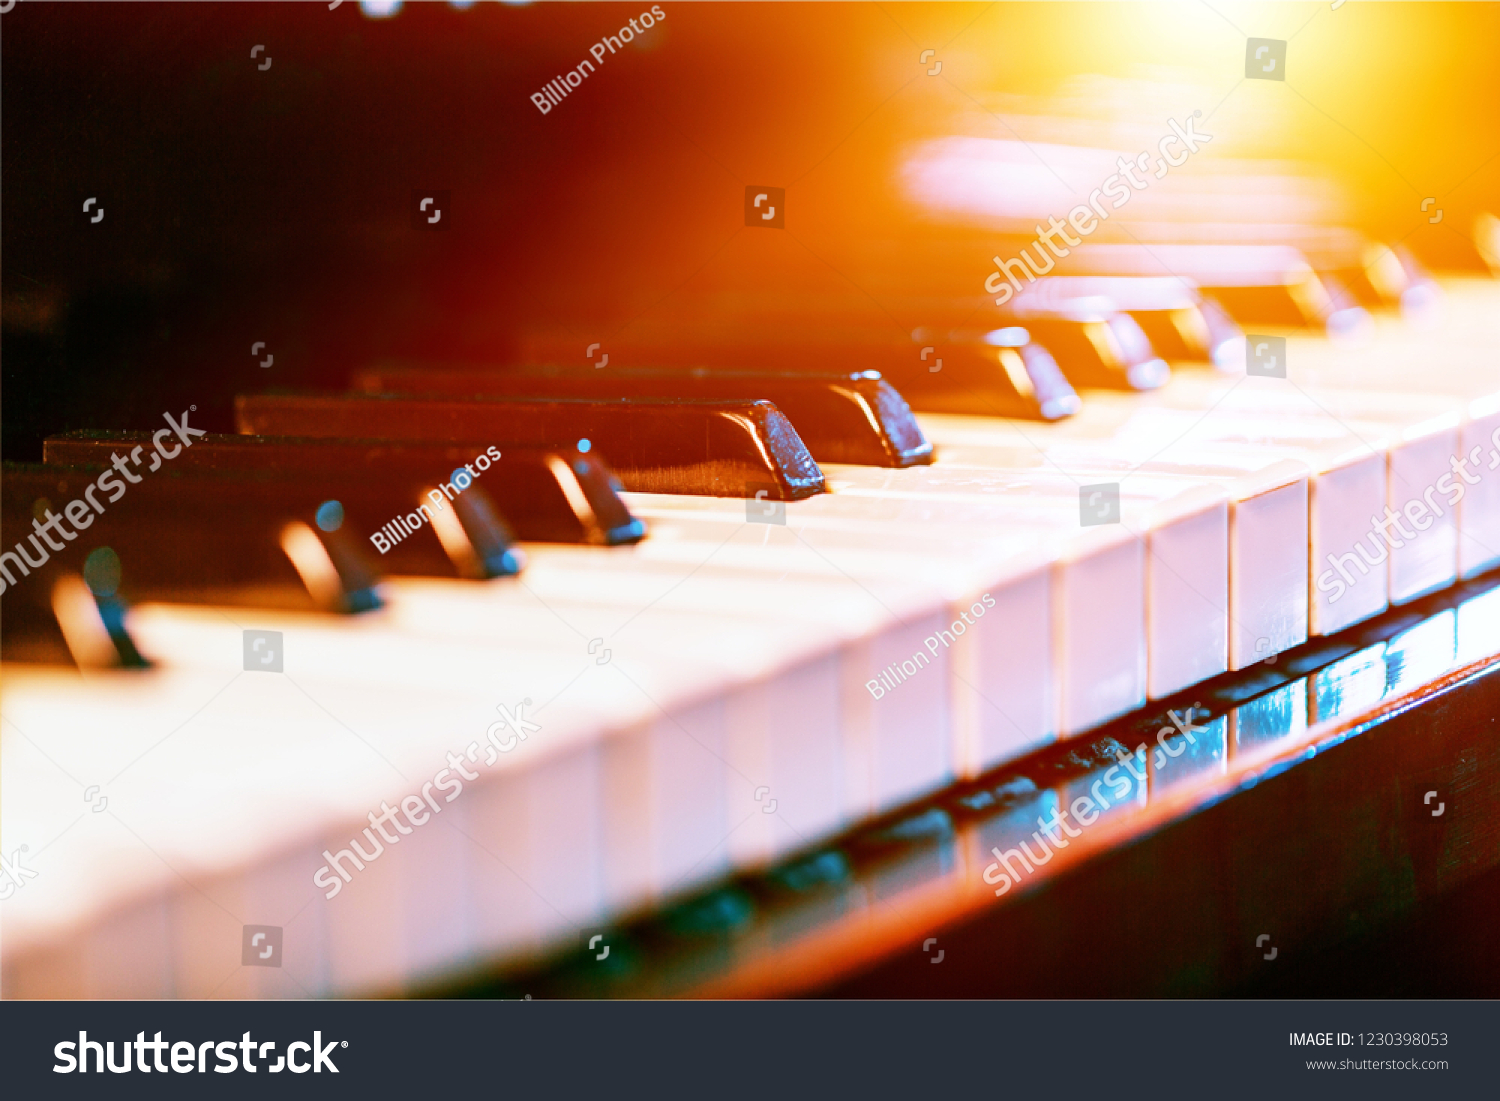 The piano was set up in the music room by the windows in the morning to allow the pianist to rehearse before the classical piano performance in celebration of the great businessman's success. #1230398053